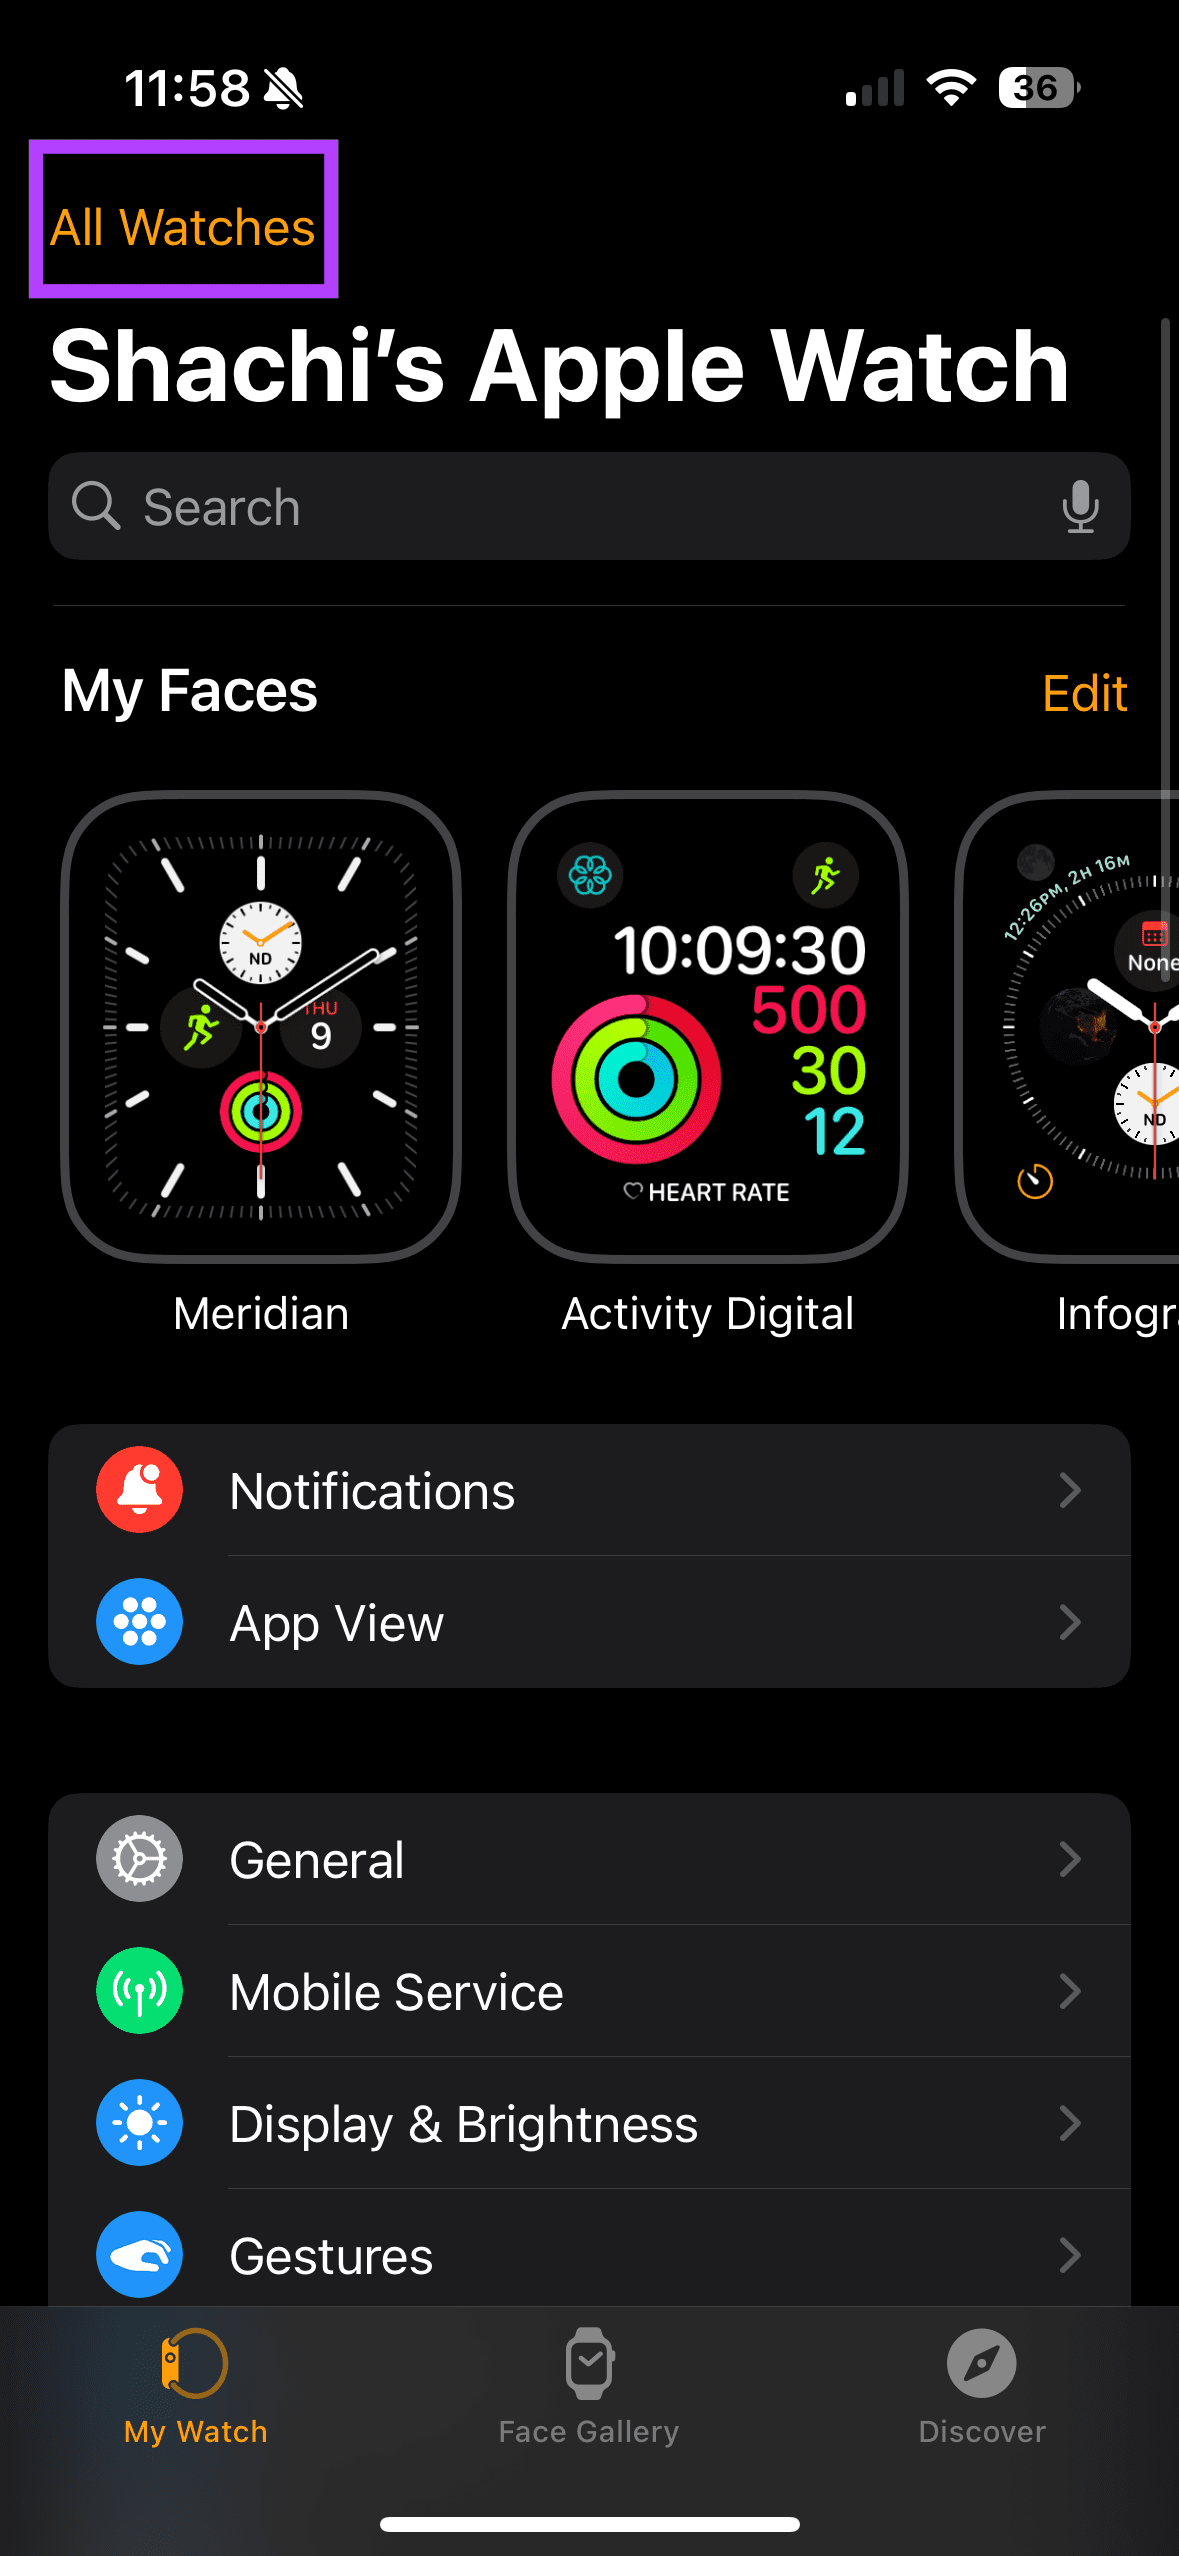 Tap All Watches